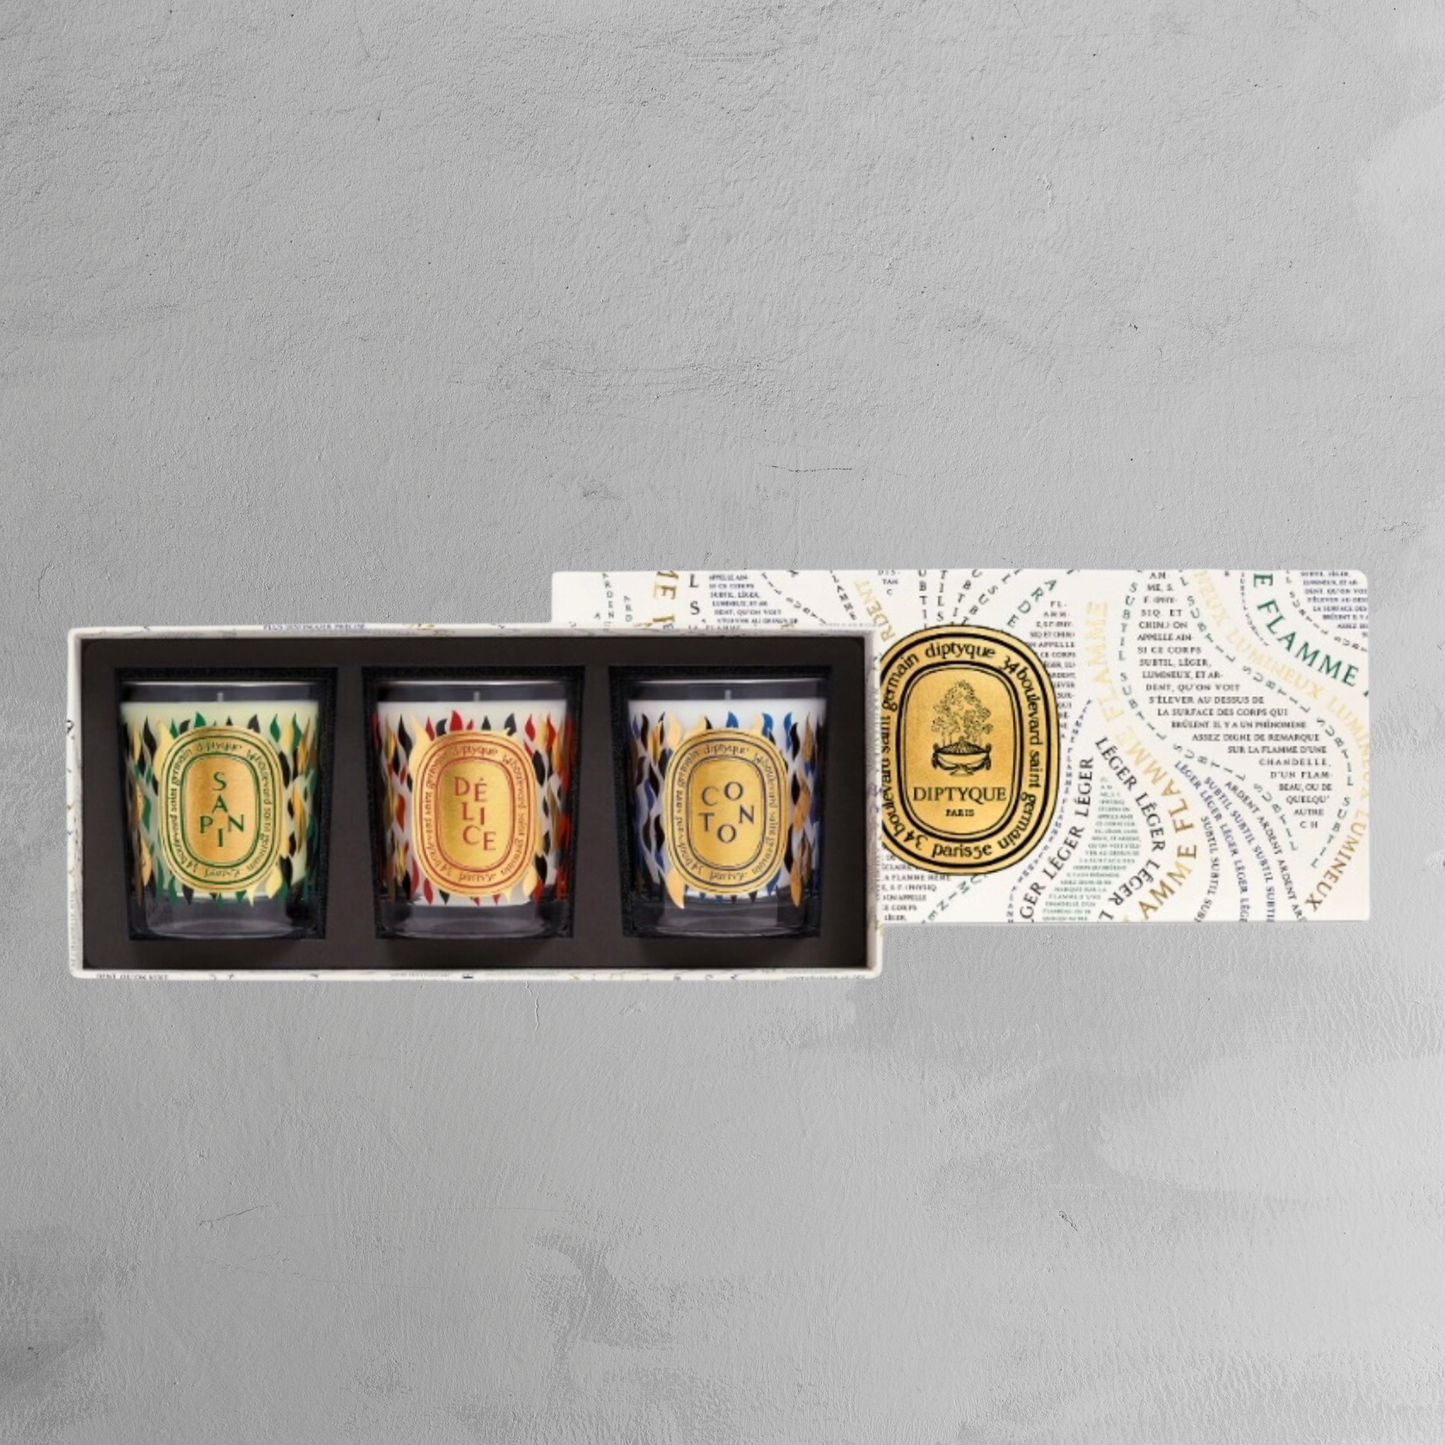 Diptyque - 3 Small Holiday Candles- Scents of Winter - Limited Edition